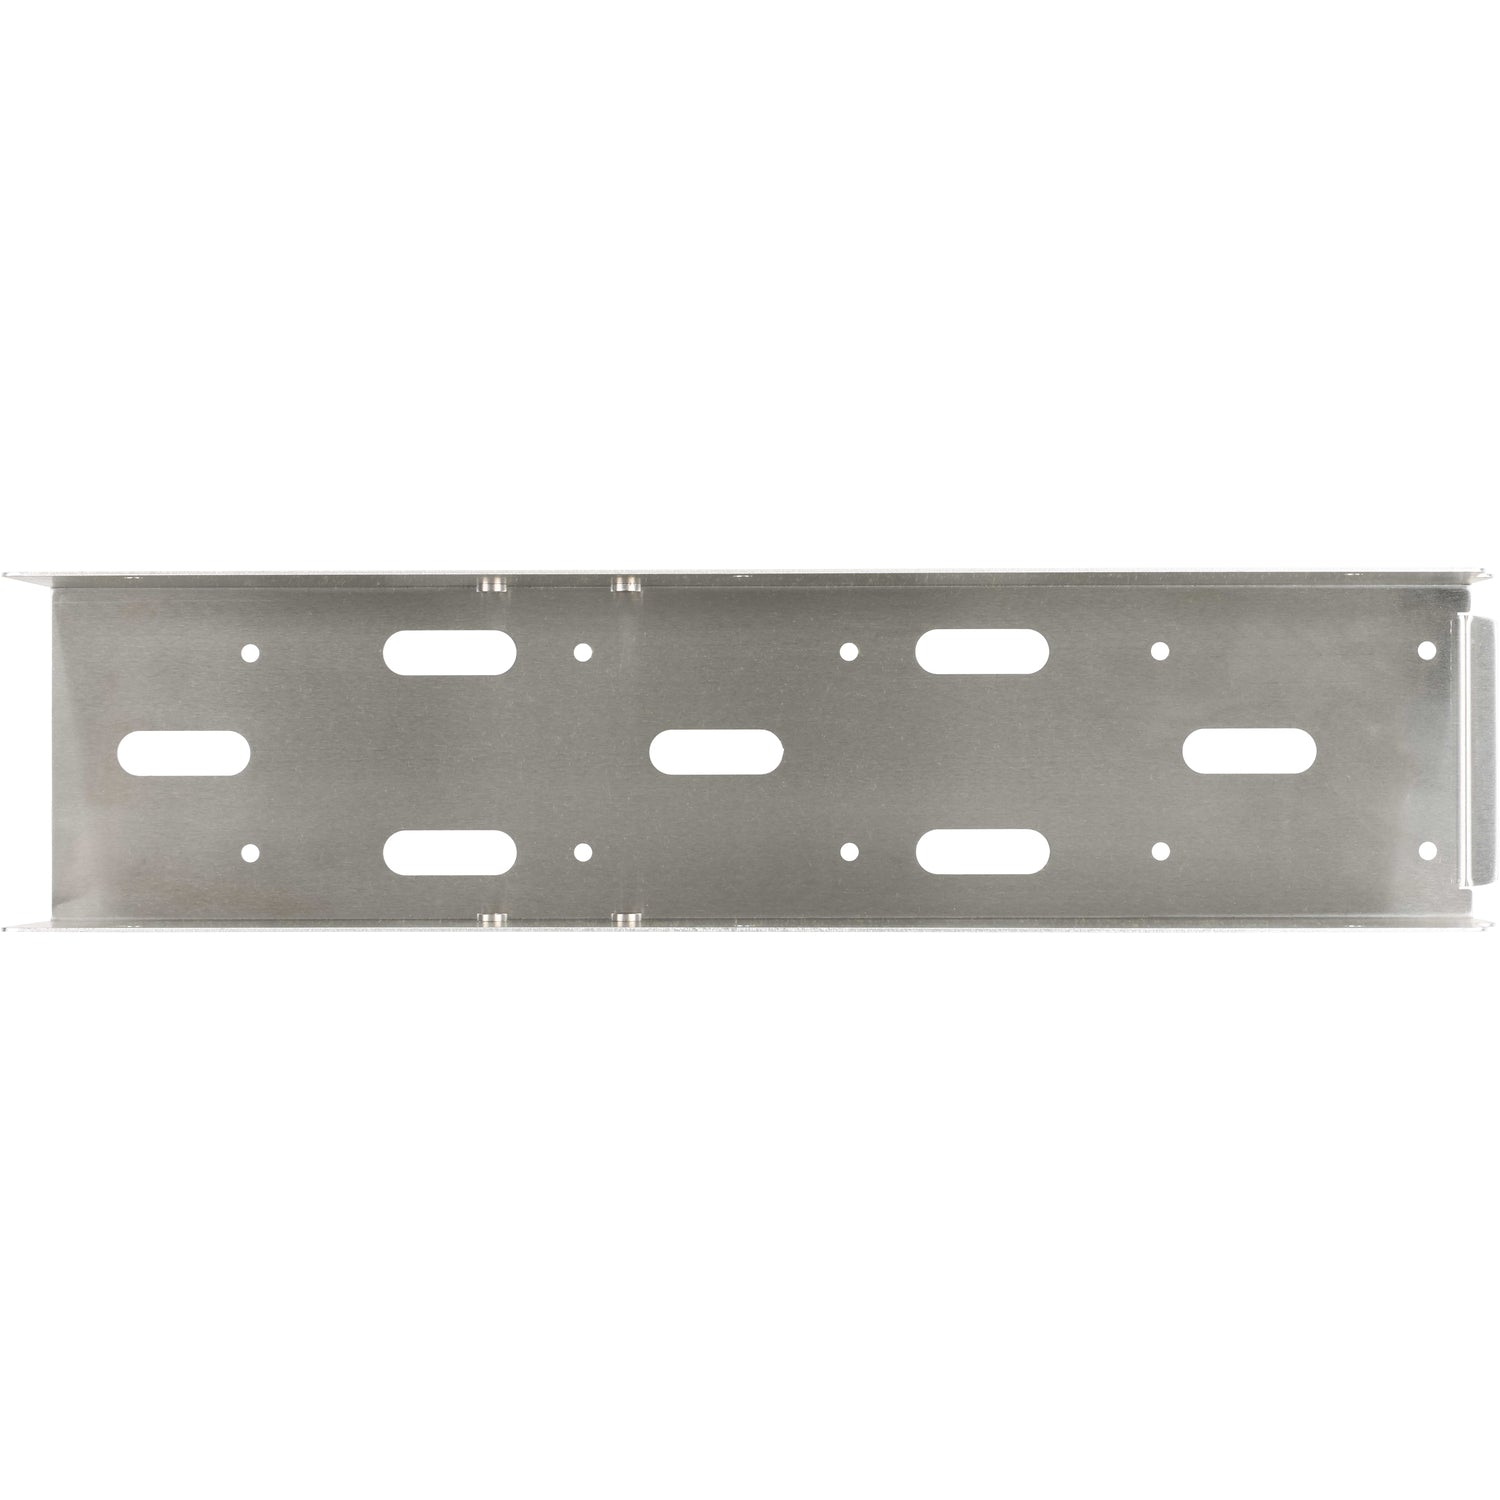 Bent stainless steel exit chute with drain holes and press fit nuts shown on white background.